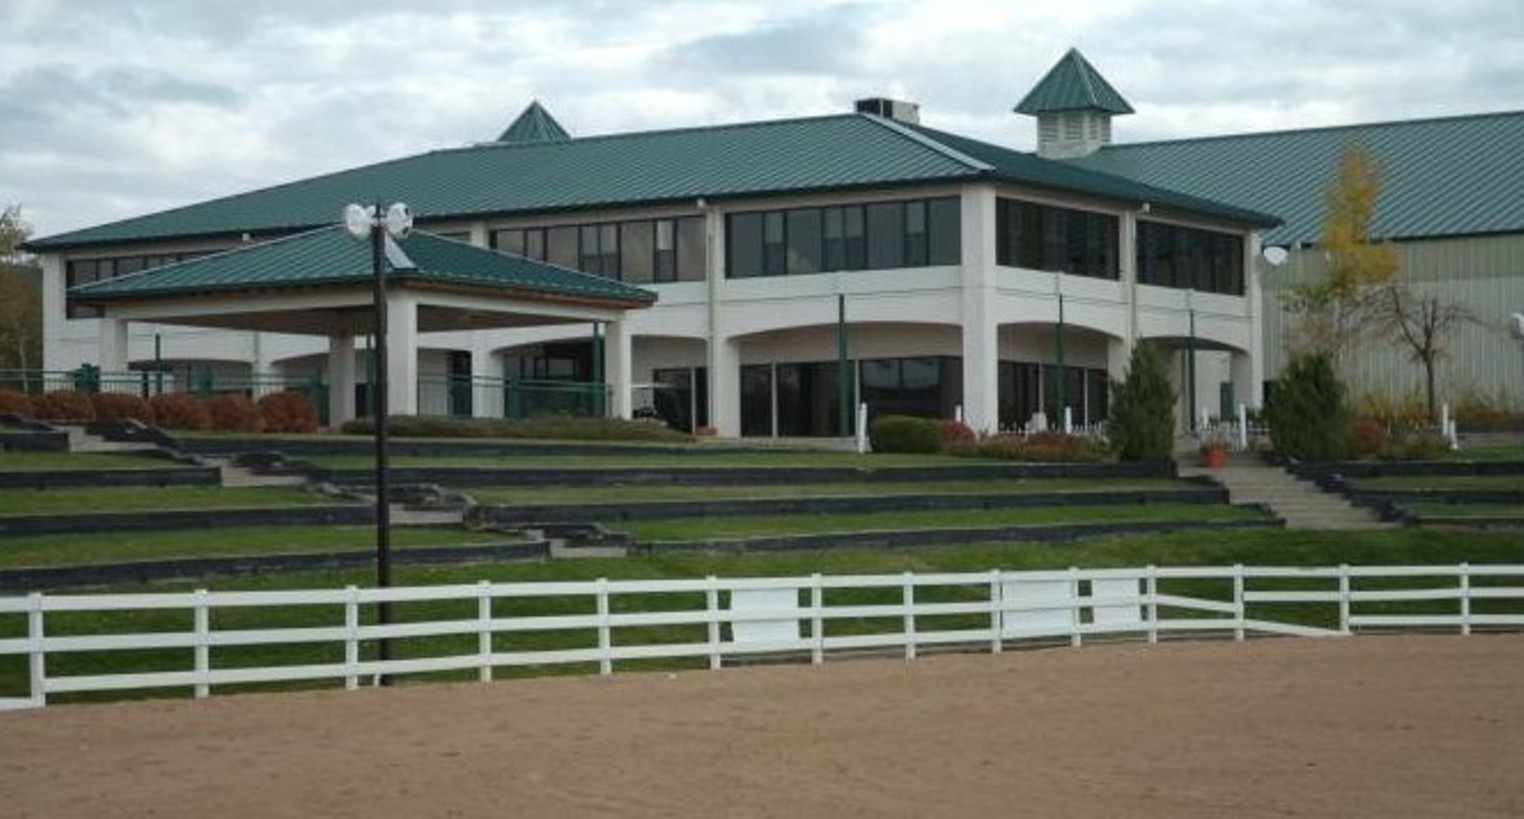 Best Spa for Horses 2005 The Colorado Horse Park Best of Denver® Best Restaurants, Bars, Clubs, Music and Stores in Denver Westword pic